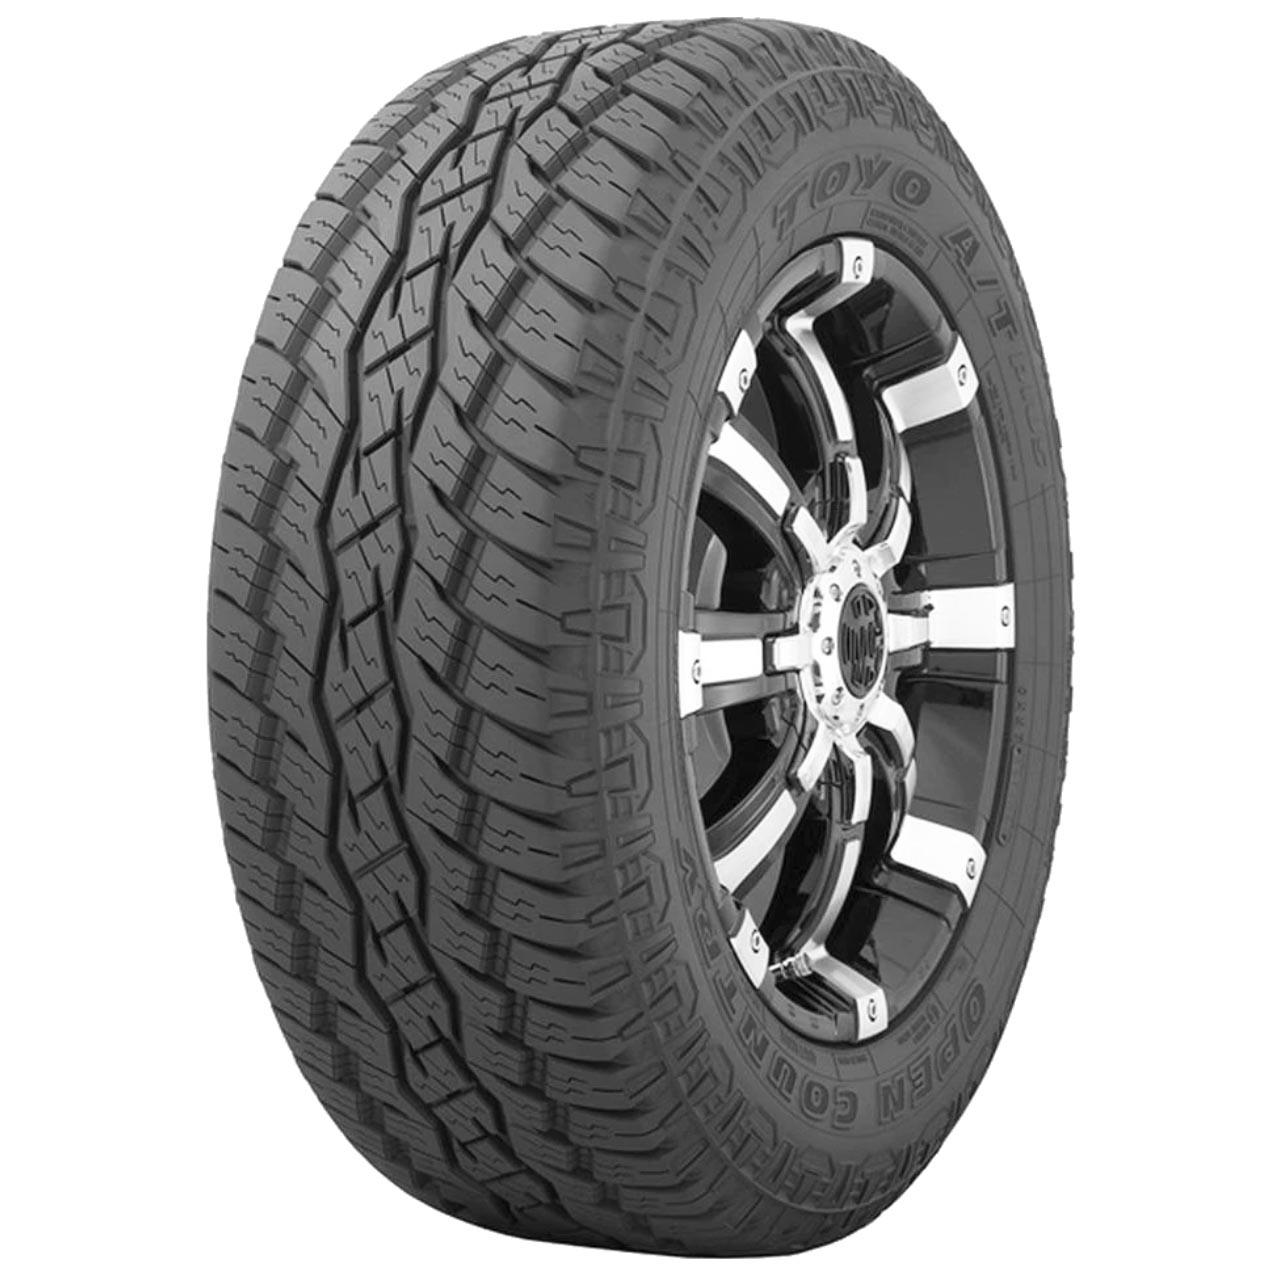 Toyo Open Country AT Plus 245/75R16C 120/116S